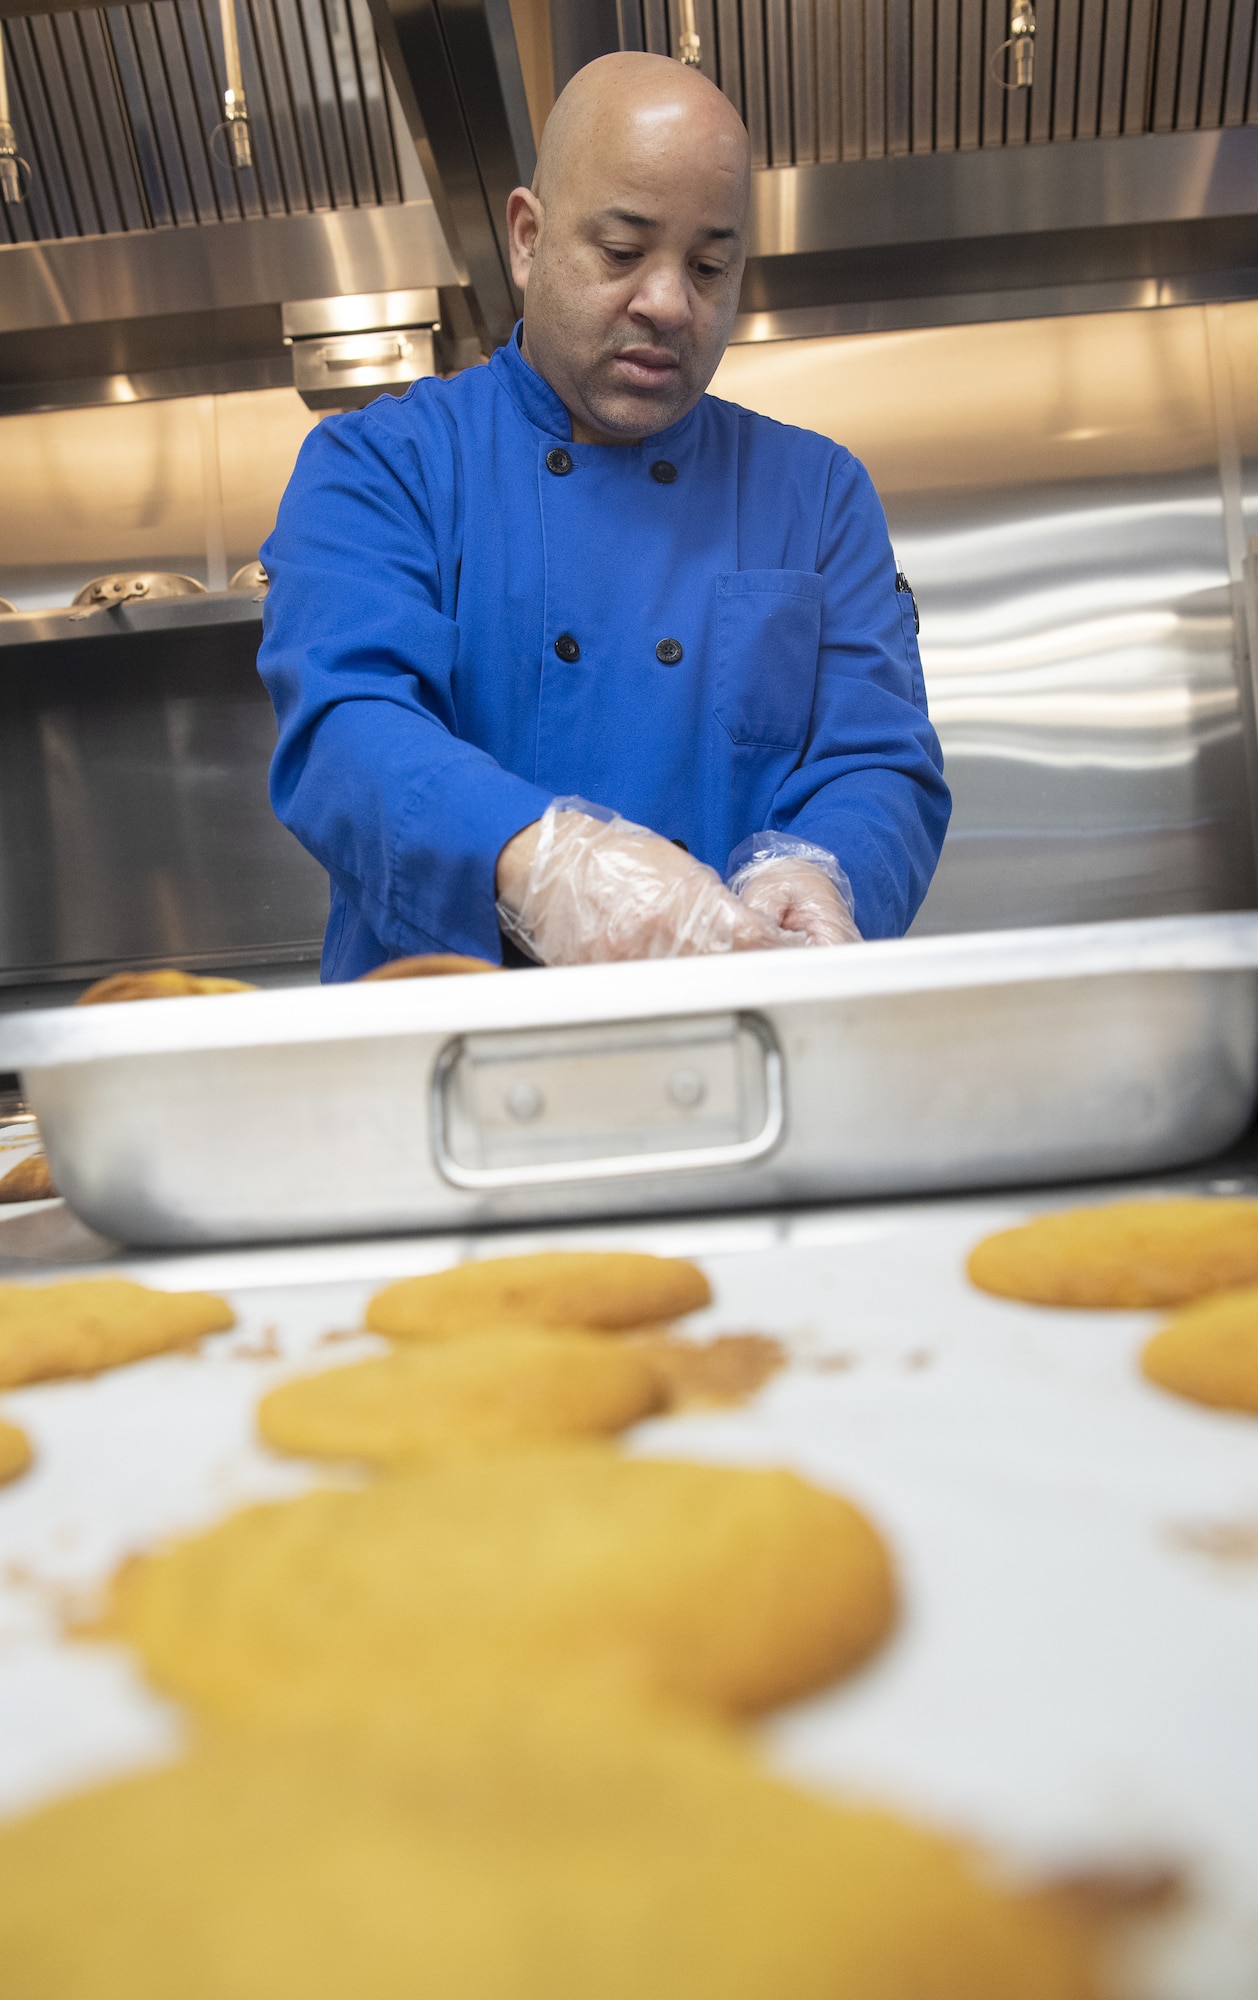 Barry Oxendine, Yokota High School culinary arts teacher, sort cookies onto trays in preparation for the base’s annual Yokota Cookie Crunch at the Yokota High School located at Yokota Air Base, Japan, Dec. 8, 2022. Hosted by the Enlisted Spouses Club, the Team Yokota Cookie Crunch originated in 2005 as a way for members of Yokota to deliver homemade sweets to unaccompanied service members residing in the dorms while living away from home. (U.S. Air Force photo by Tech. Sgt. Christopher Hubenthal)